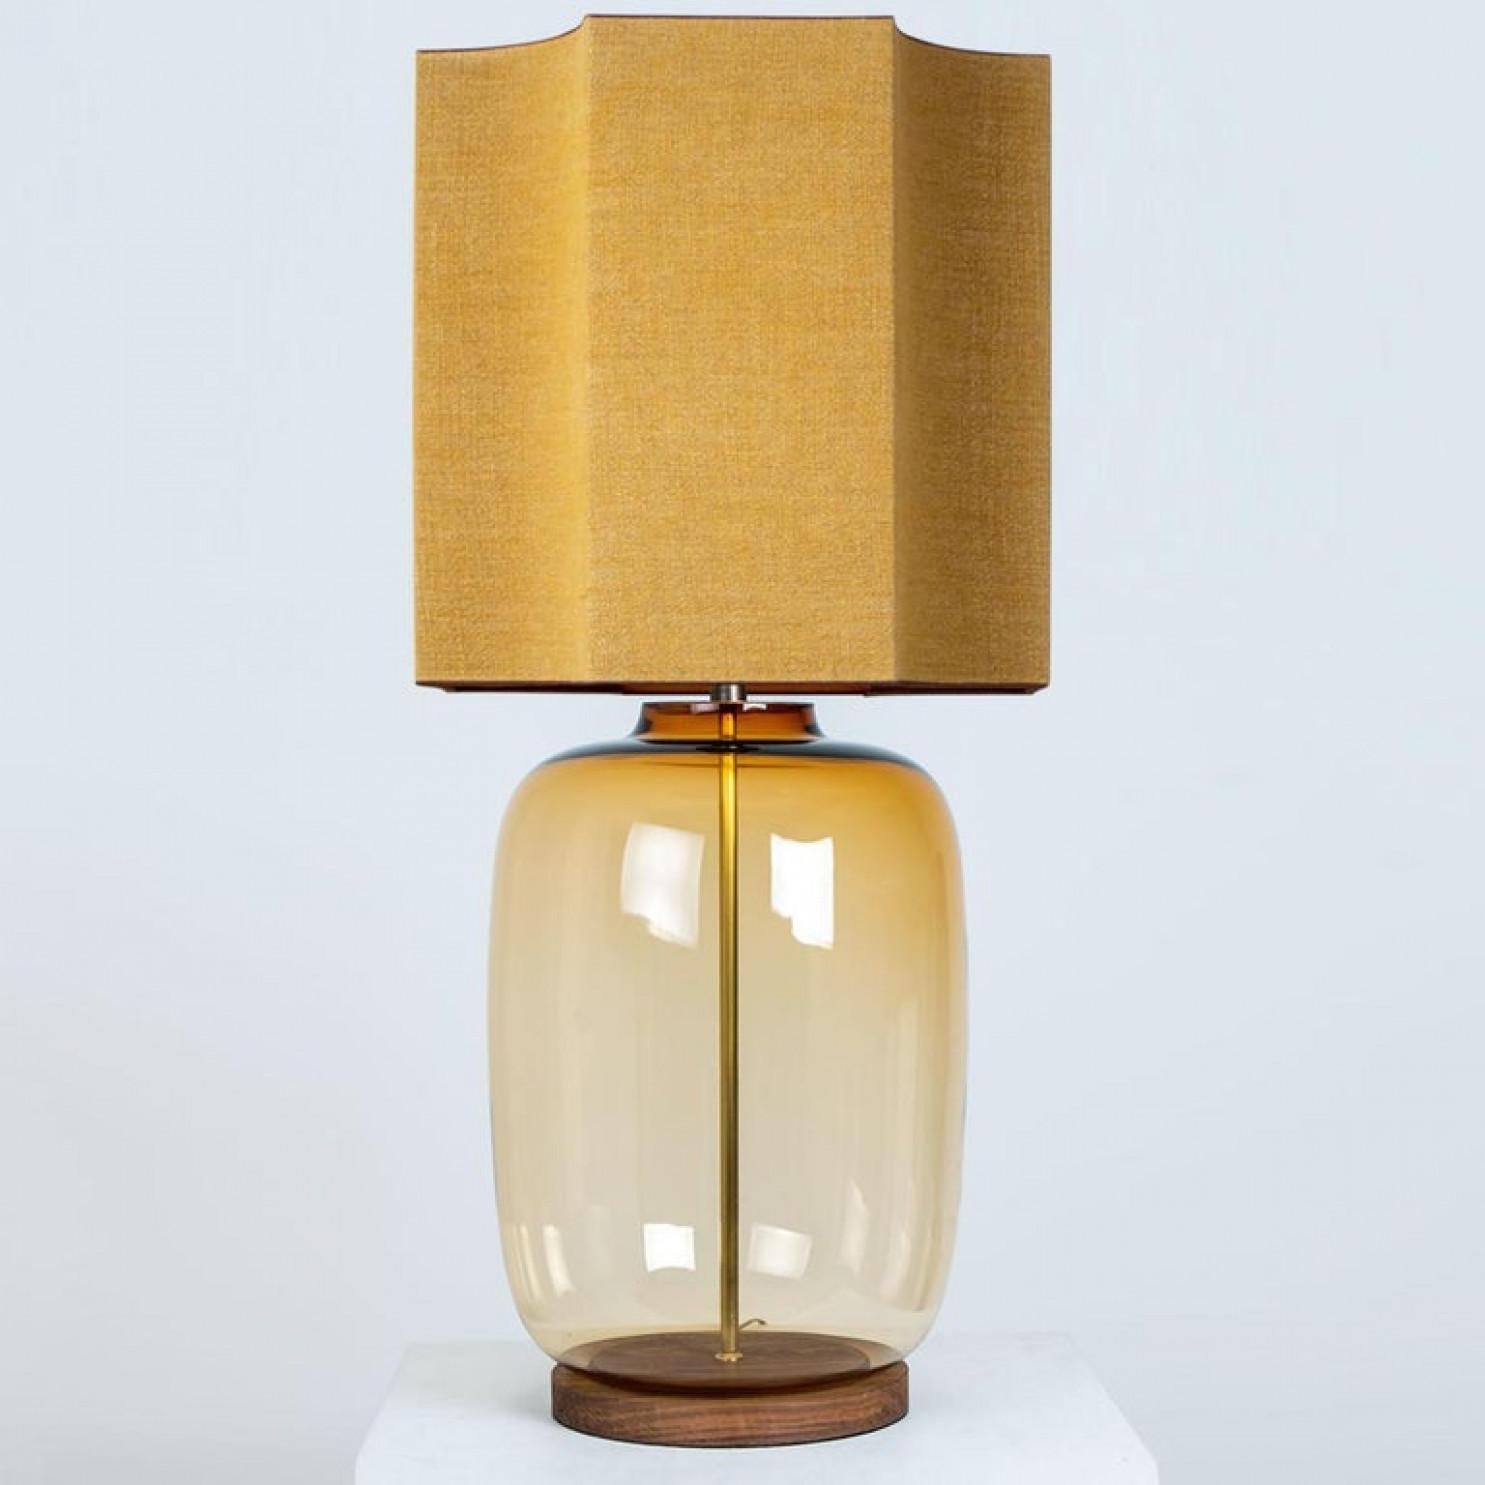 A unique Minimalist timeless design. Each extra large glass table lamp features a yellow exceptional transparent shaped base with a solid burr walnut foot with old brass accents and a brass rod running through the center. Enhancing the light and